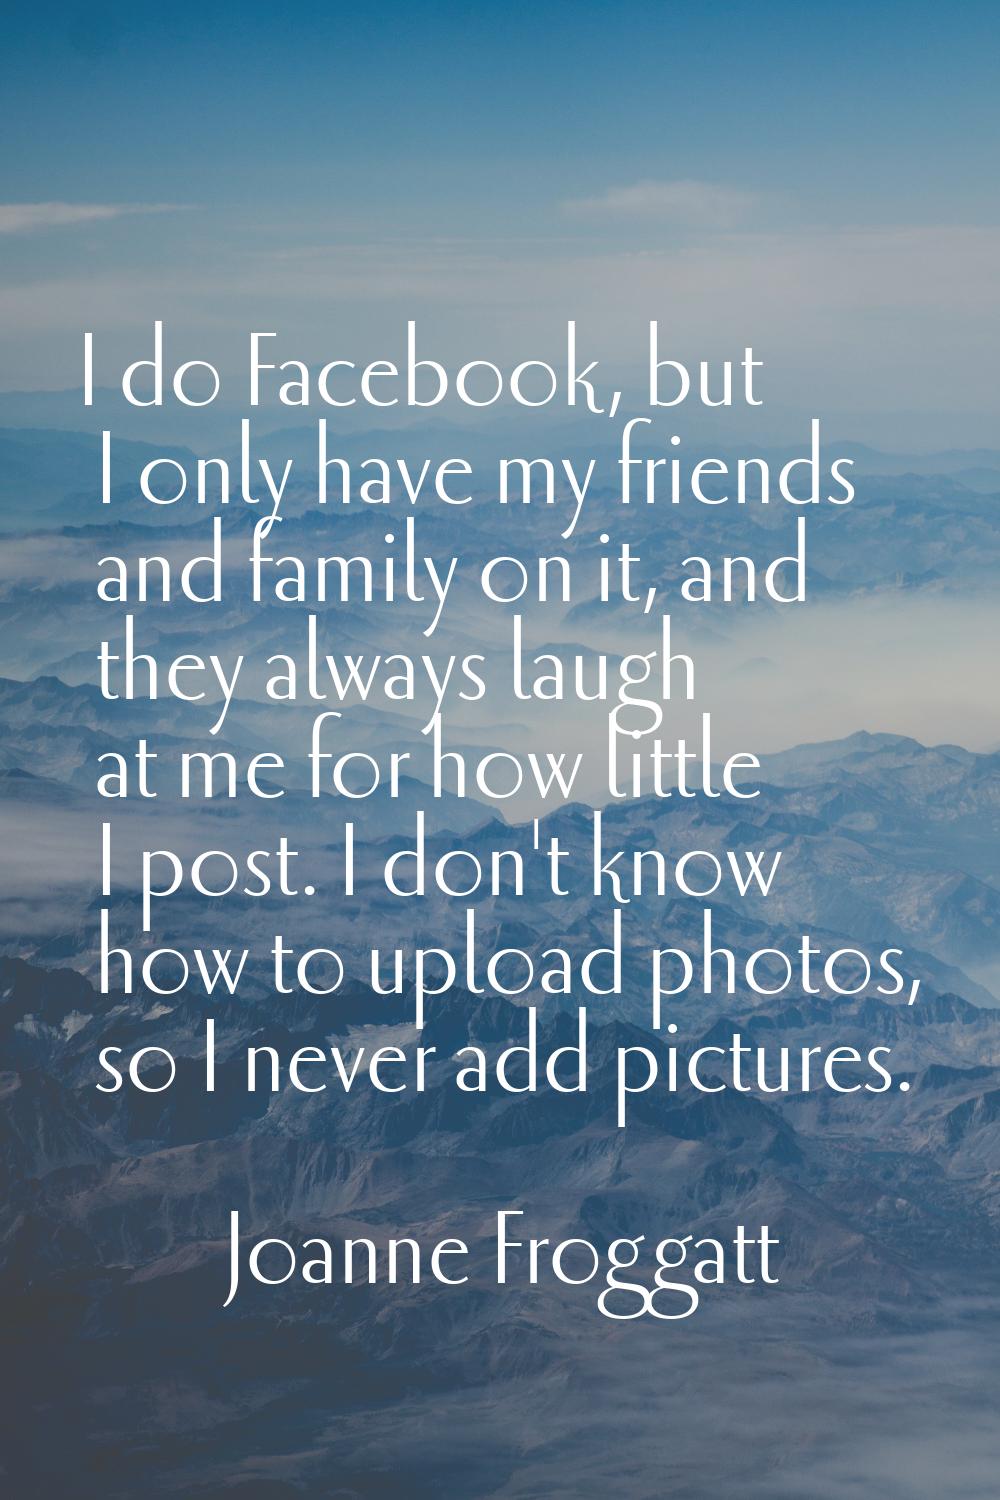 I do Facebook, but I only have my friends and family on it, and they always laugh at me for how lit